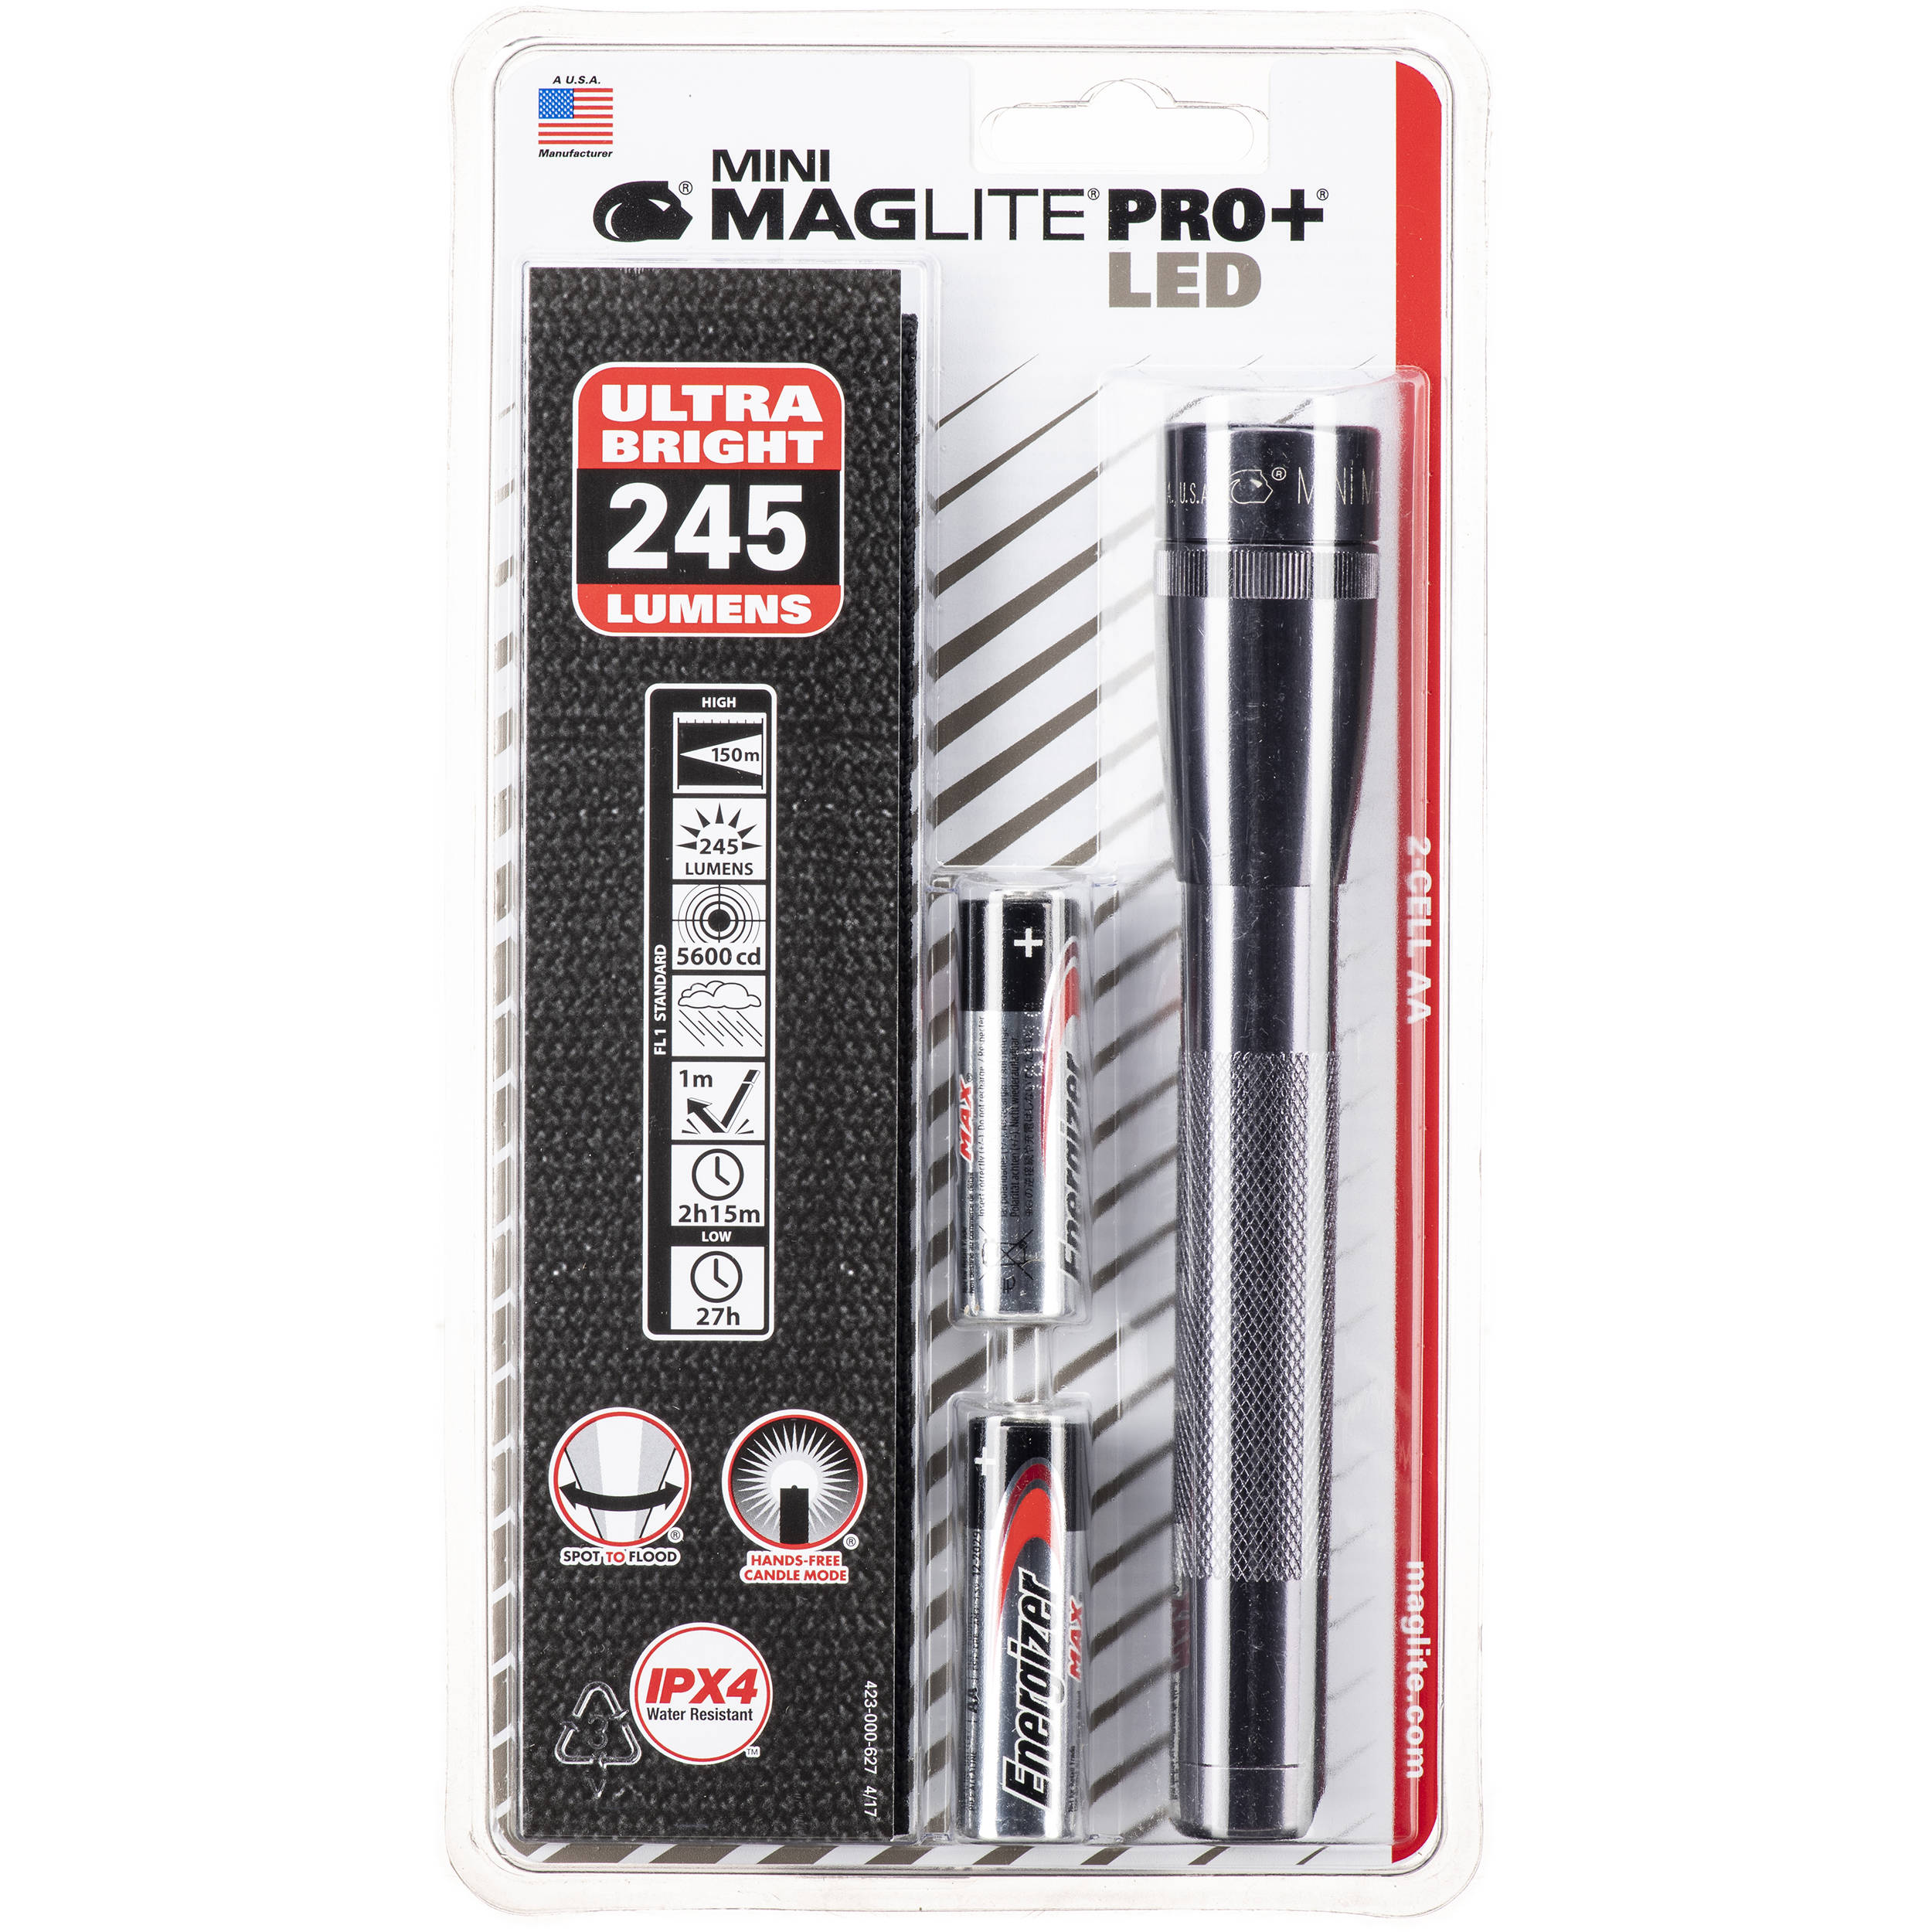 Maglite Mini Maglite Pro 2aa Led Flashlight With Holster Spp11h